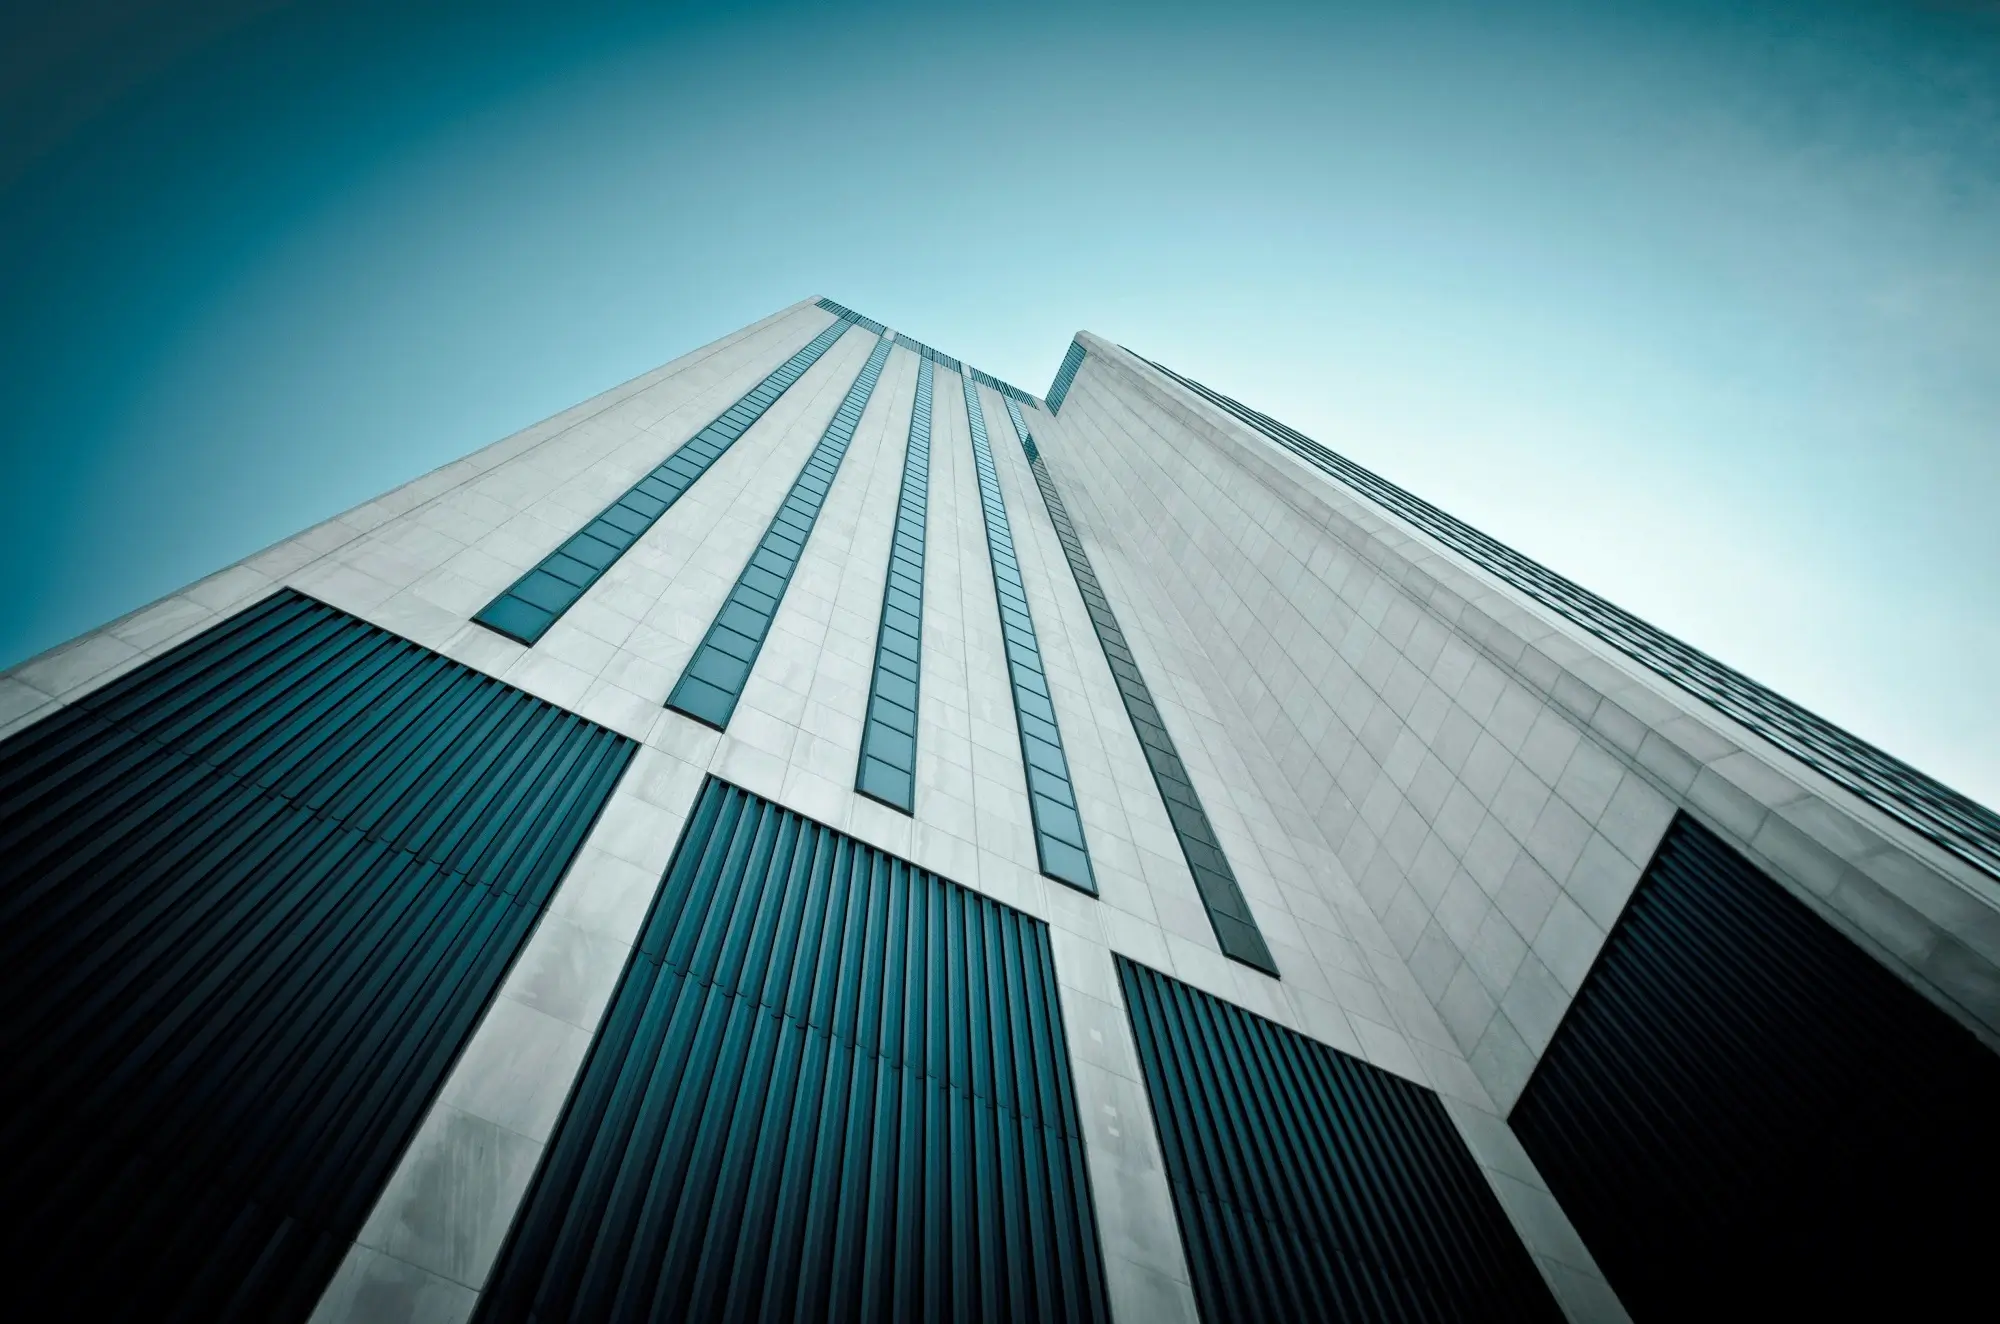 A worm's eye view of a black and white skyscraper, representing the concept of controlled foreign company.